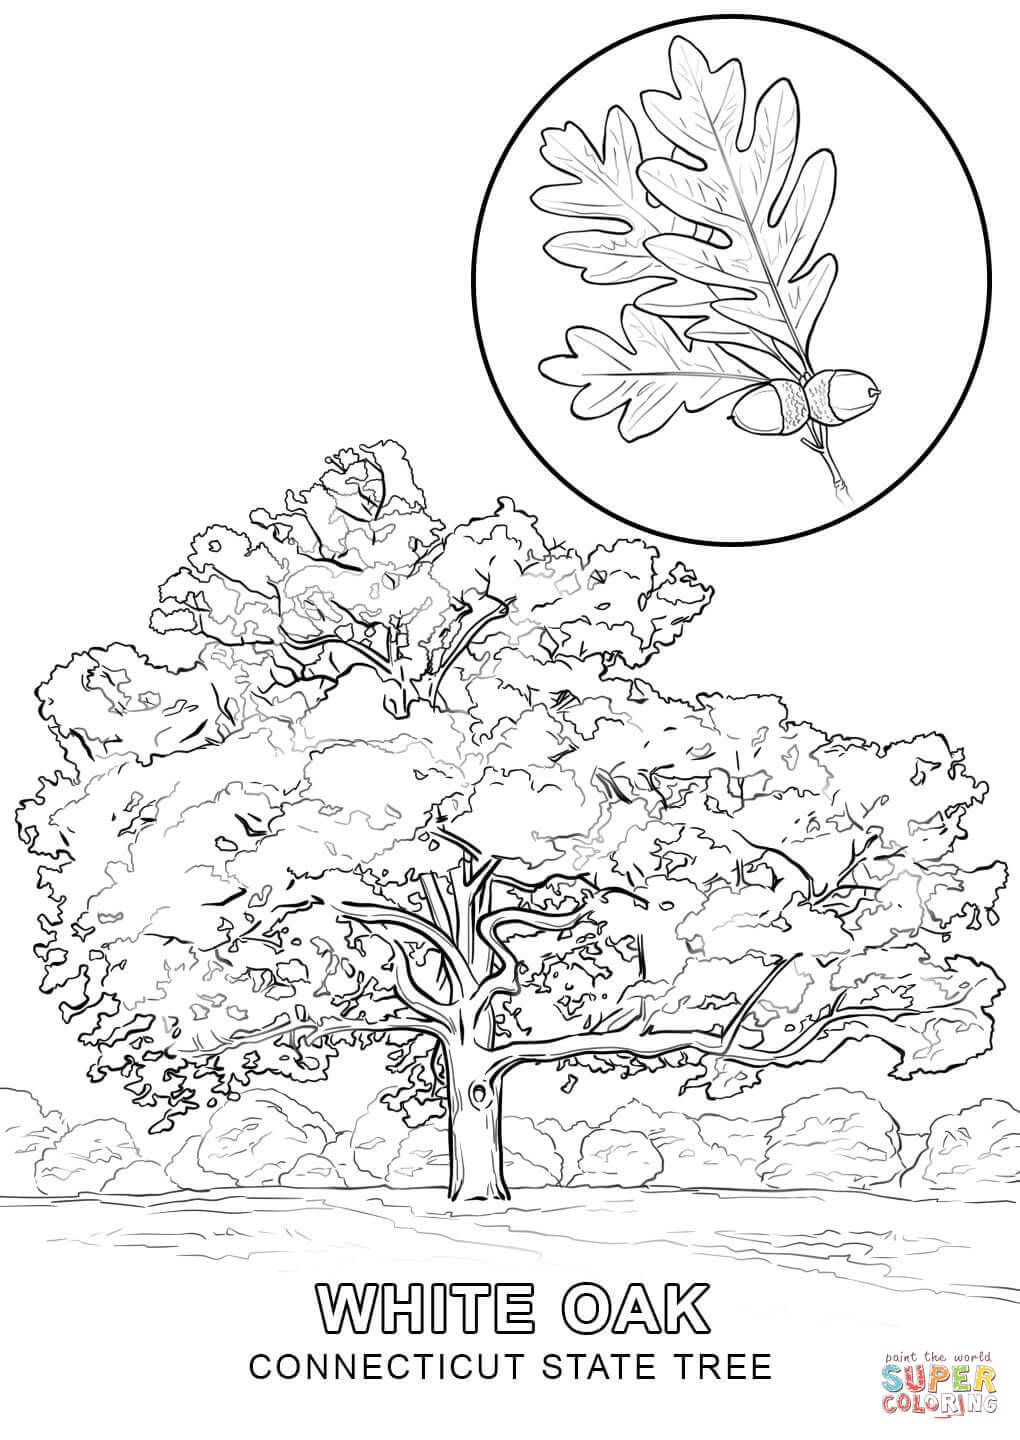 Connecticut State Tree coloring page | Free Printable Coloring Pages